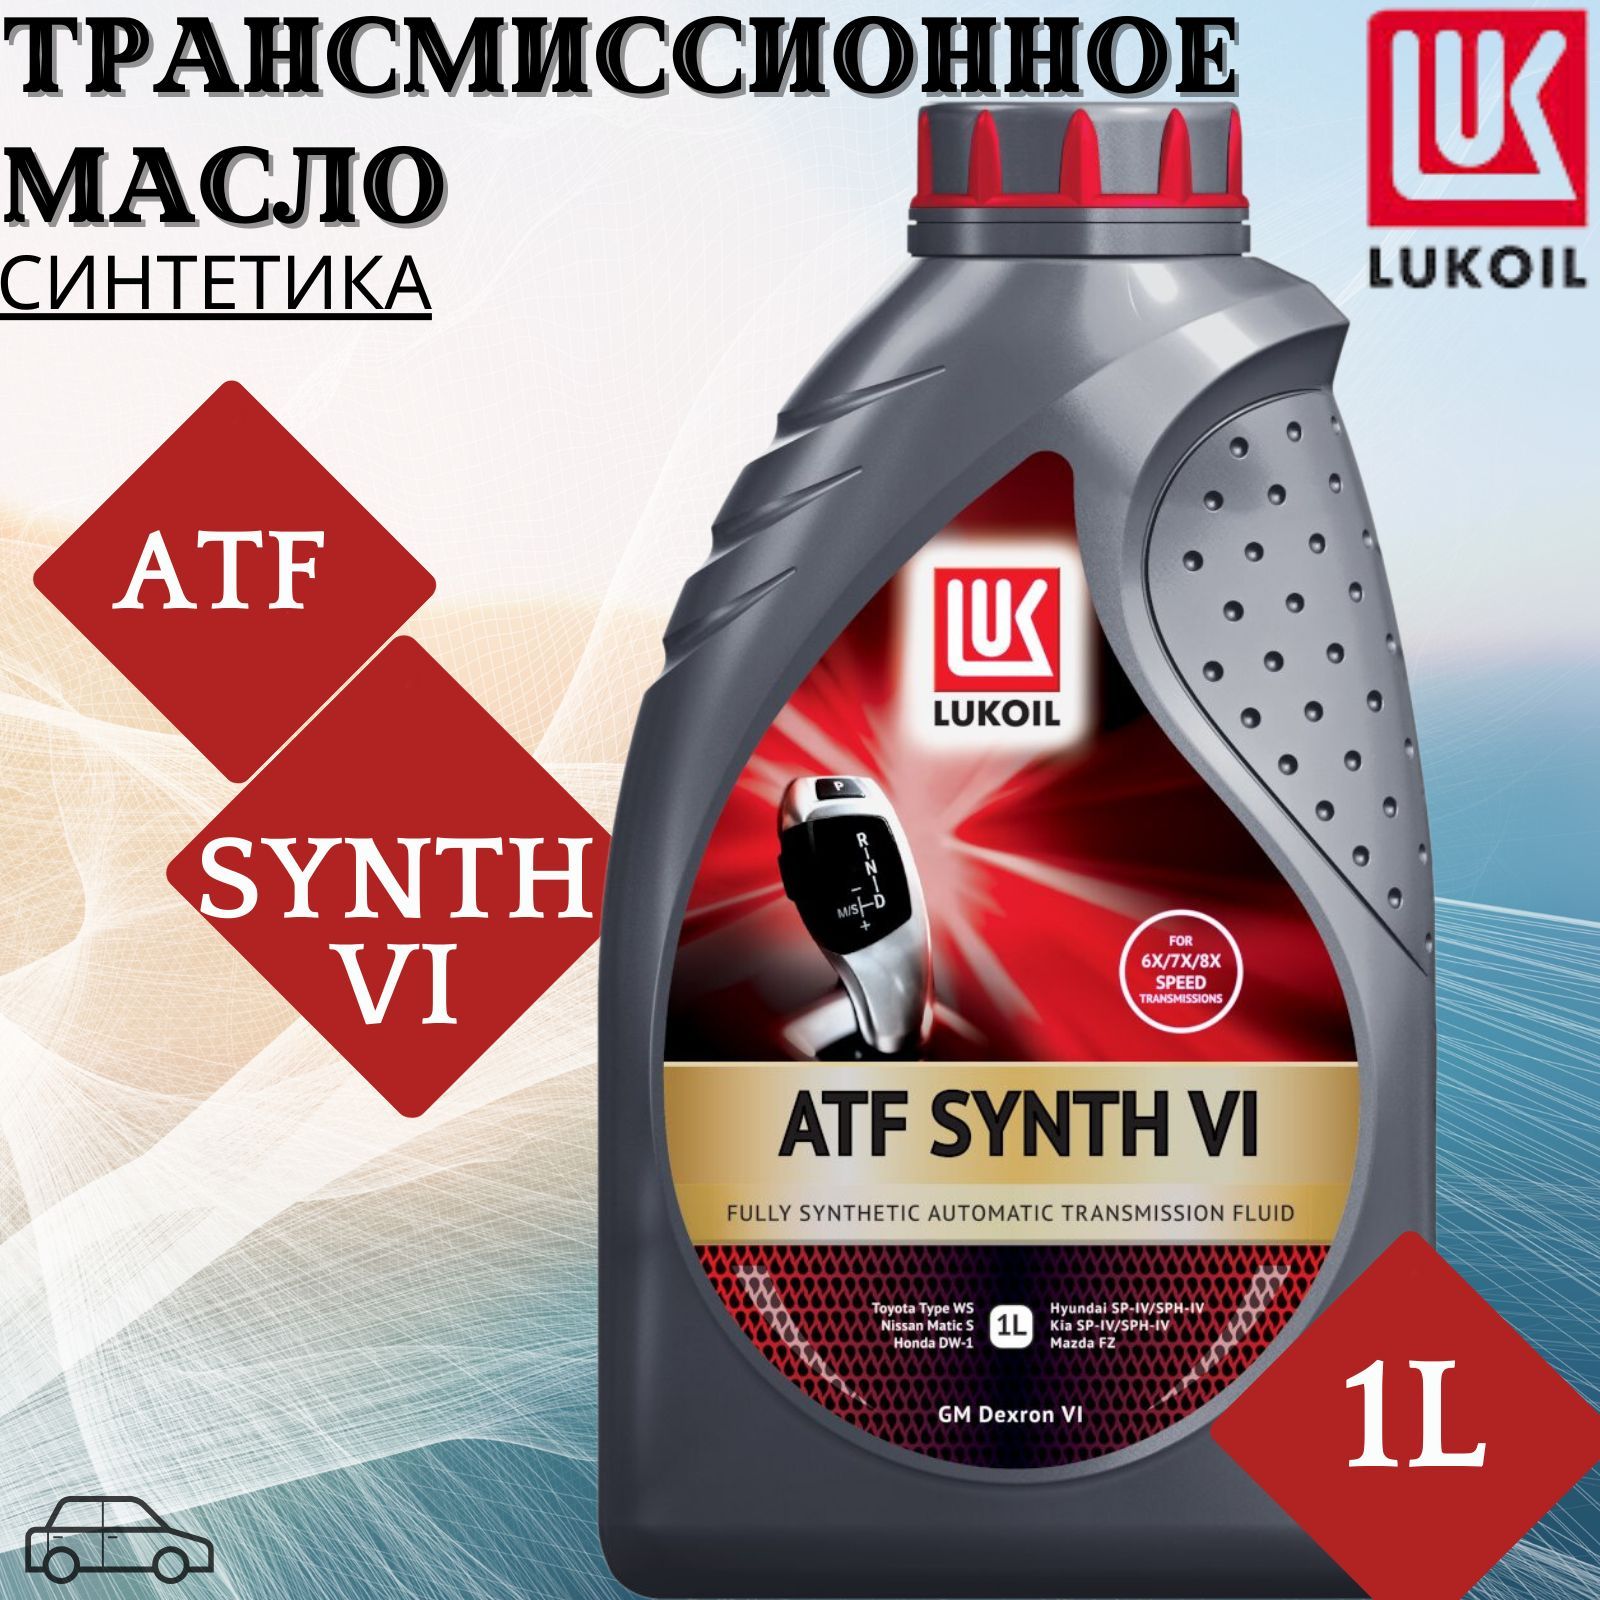 Лукойл ATF Synth v. Лукойл synth vi